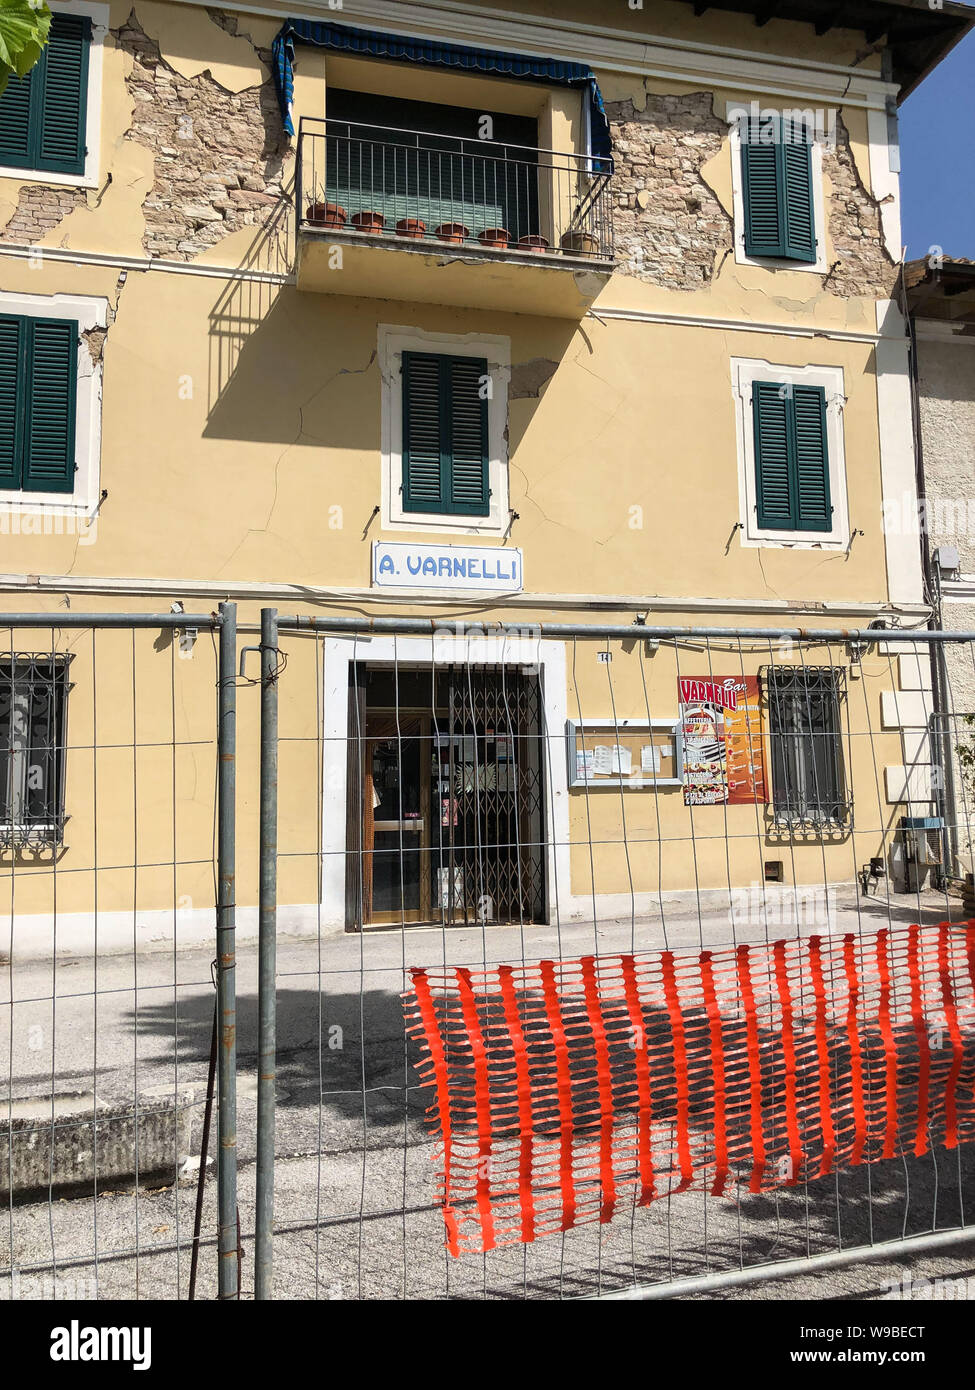 Pievebovigliana, now part of the municipality of Valfornace, was a town in the Marches that was badly hit by the 2016 earthquake. Since then, almost all the inhabitants have been homeless, living in the small houses offered by the Italian State. These photos, taken in August 2019, show how after 3 years in the area there are still red areas, dangerous areas cause imminent collapse, and how the reconstruction is put to the test by the bureaucracy and the difficulty of restoring historic homes, Italy, on August 12 2019 Stock Photo